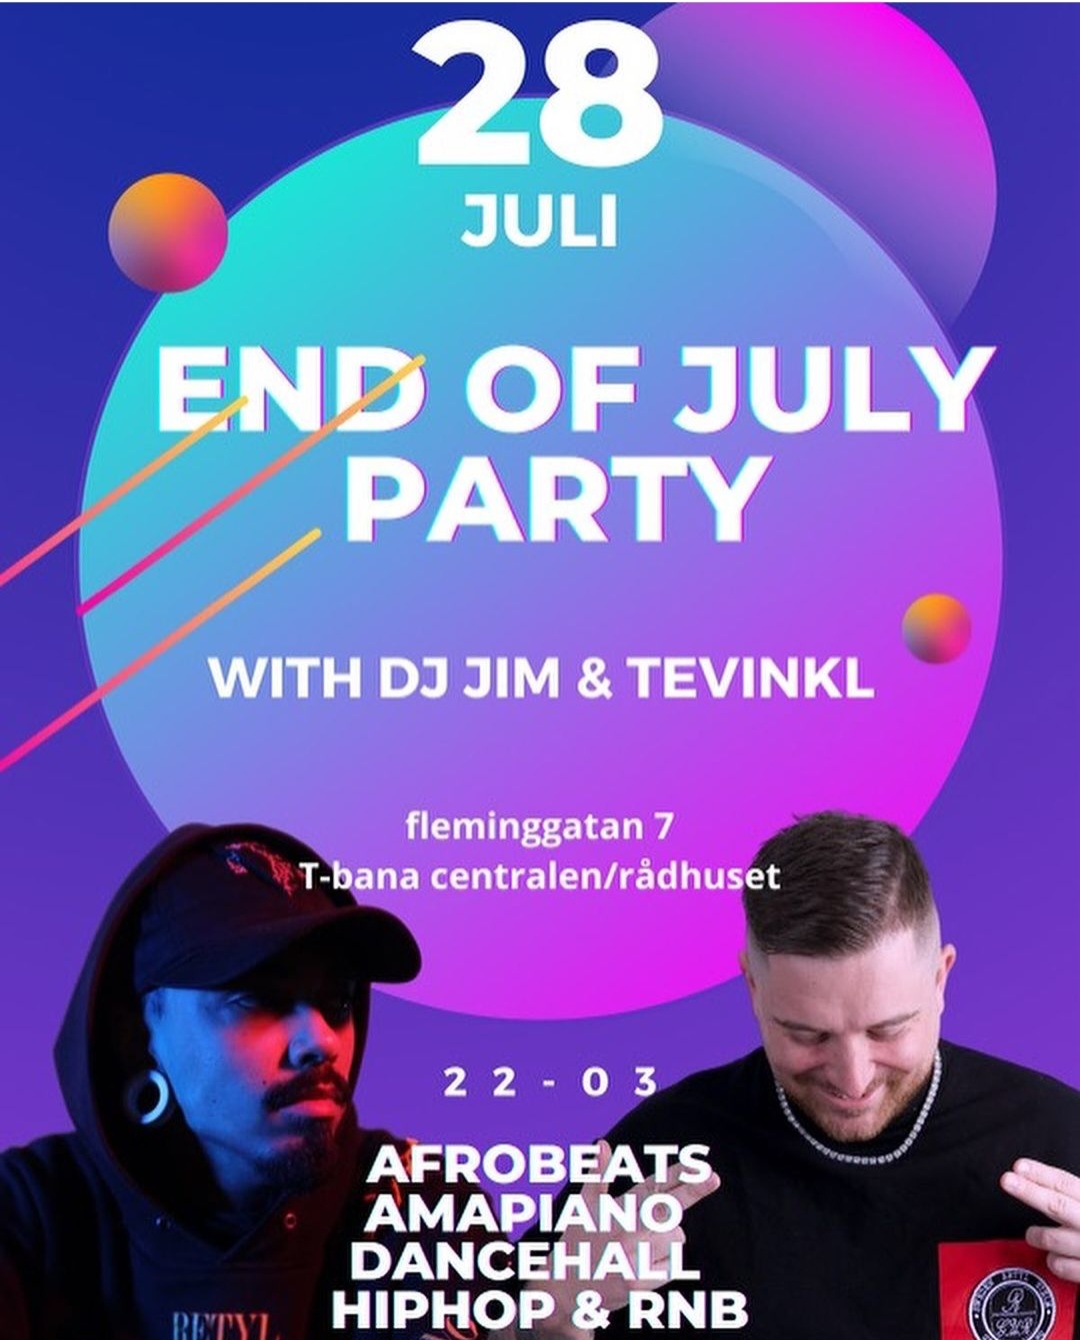 KLUBB! End of july party (STOCKHOLM)